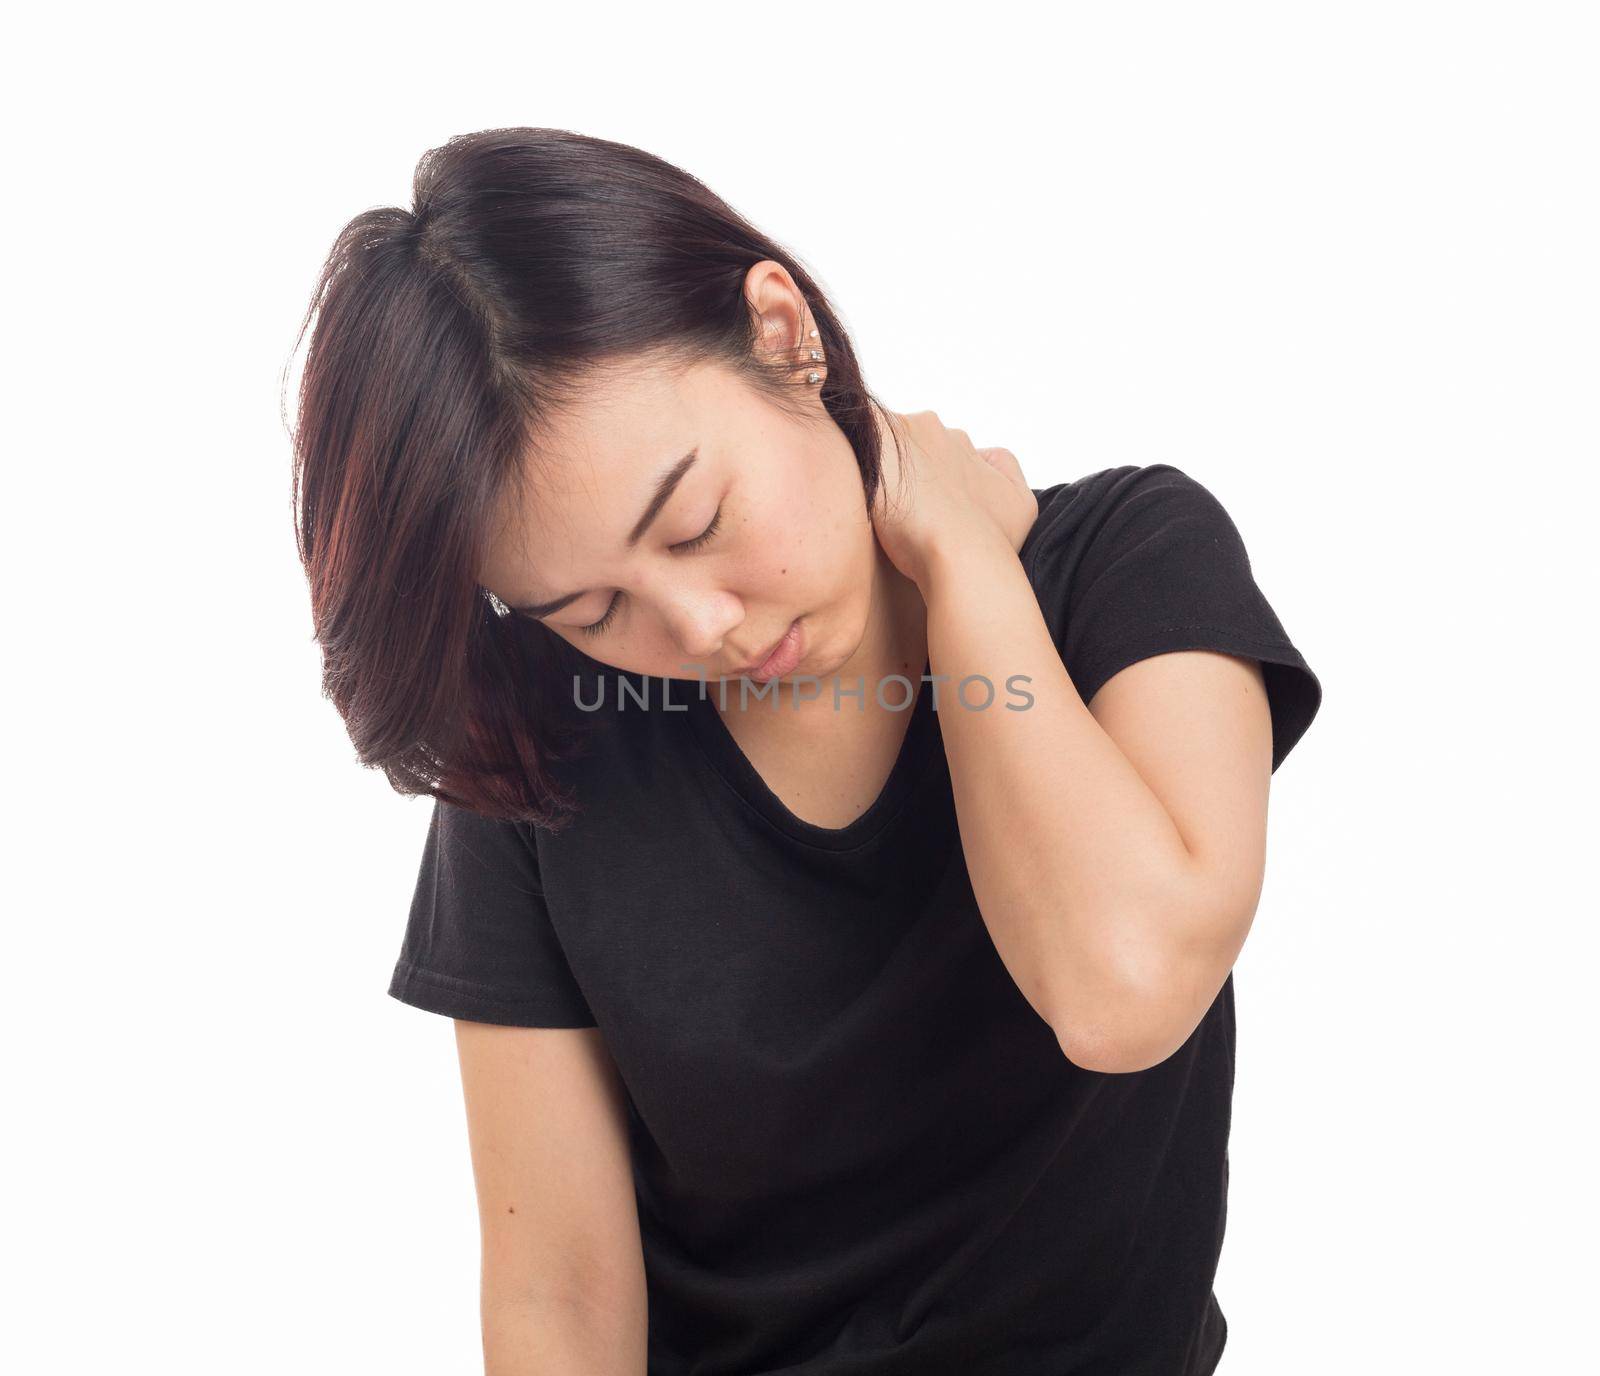 Young woman pain in neck isolated white background.